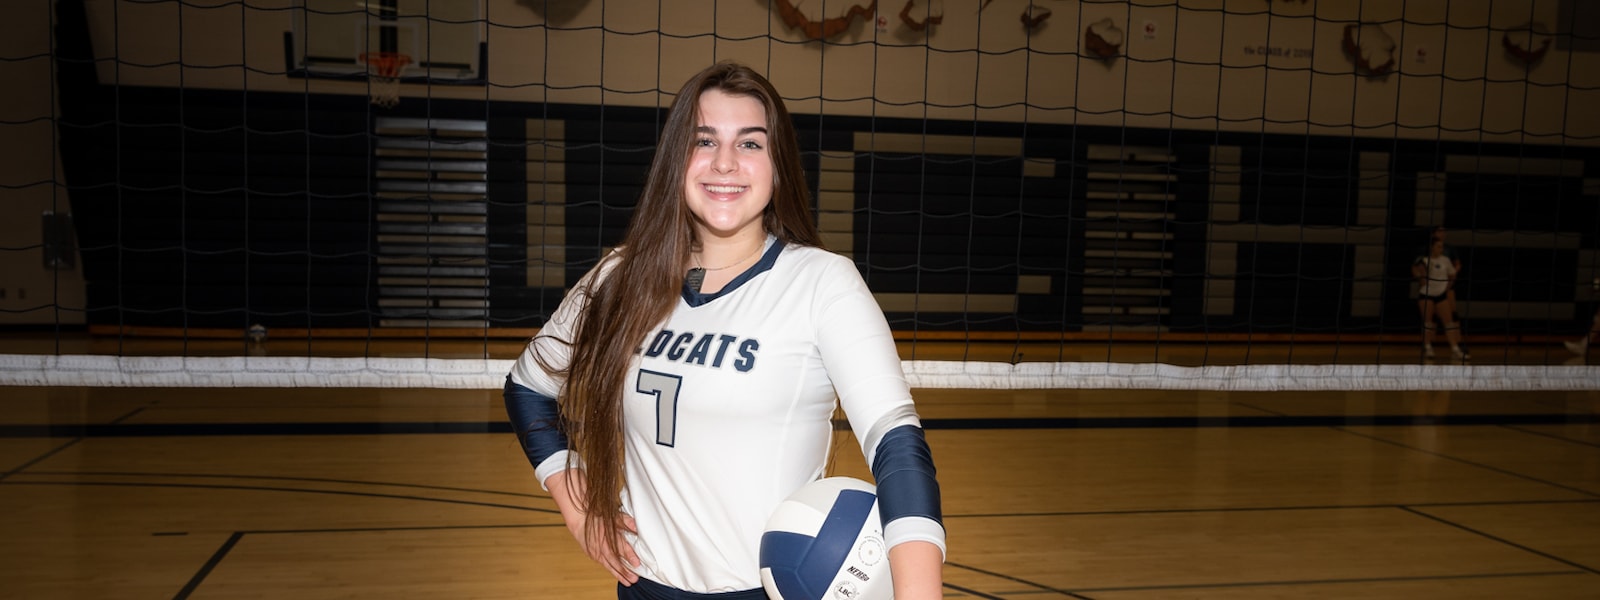 Jordyn Kellick, a volleyball player at Willow Canyon High School, poses for a photograph on the volleyball court.